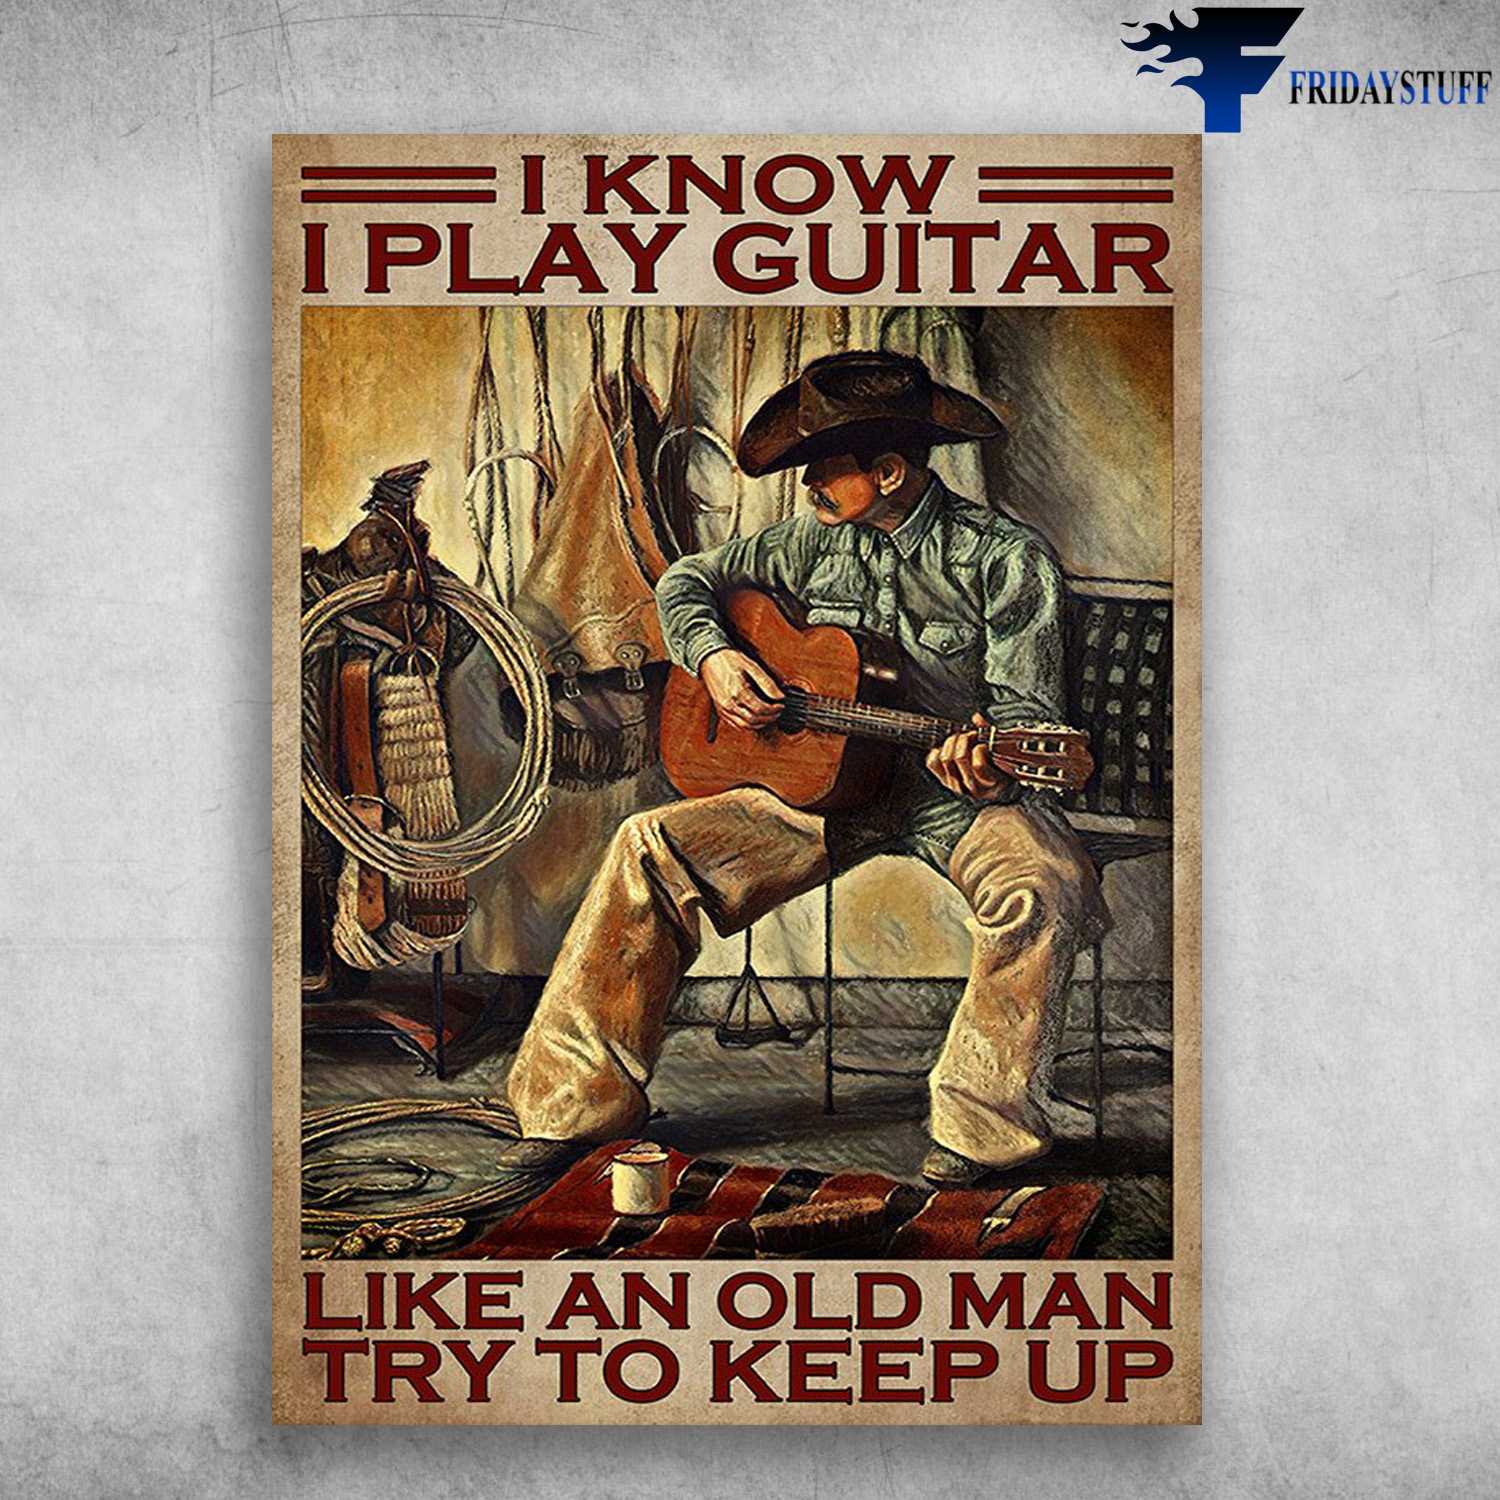 Cowboy Guitar - I Know I Play Guitar, Like An Old Man, Try To Keep Up